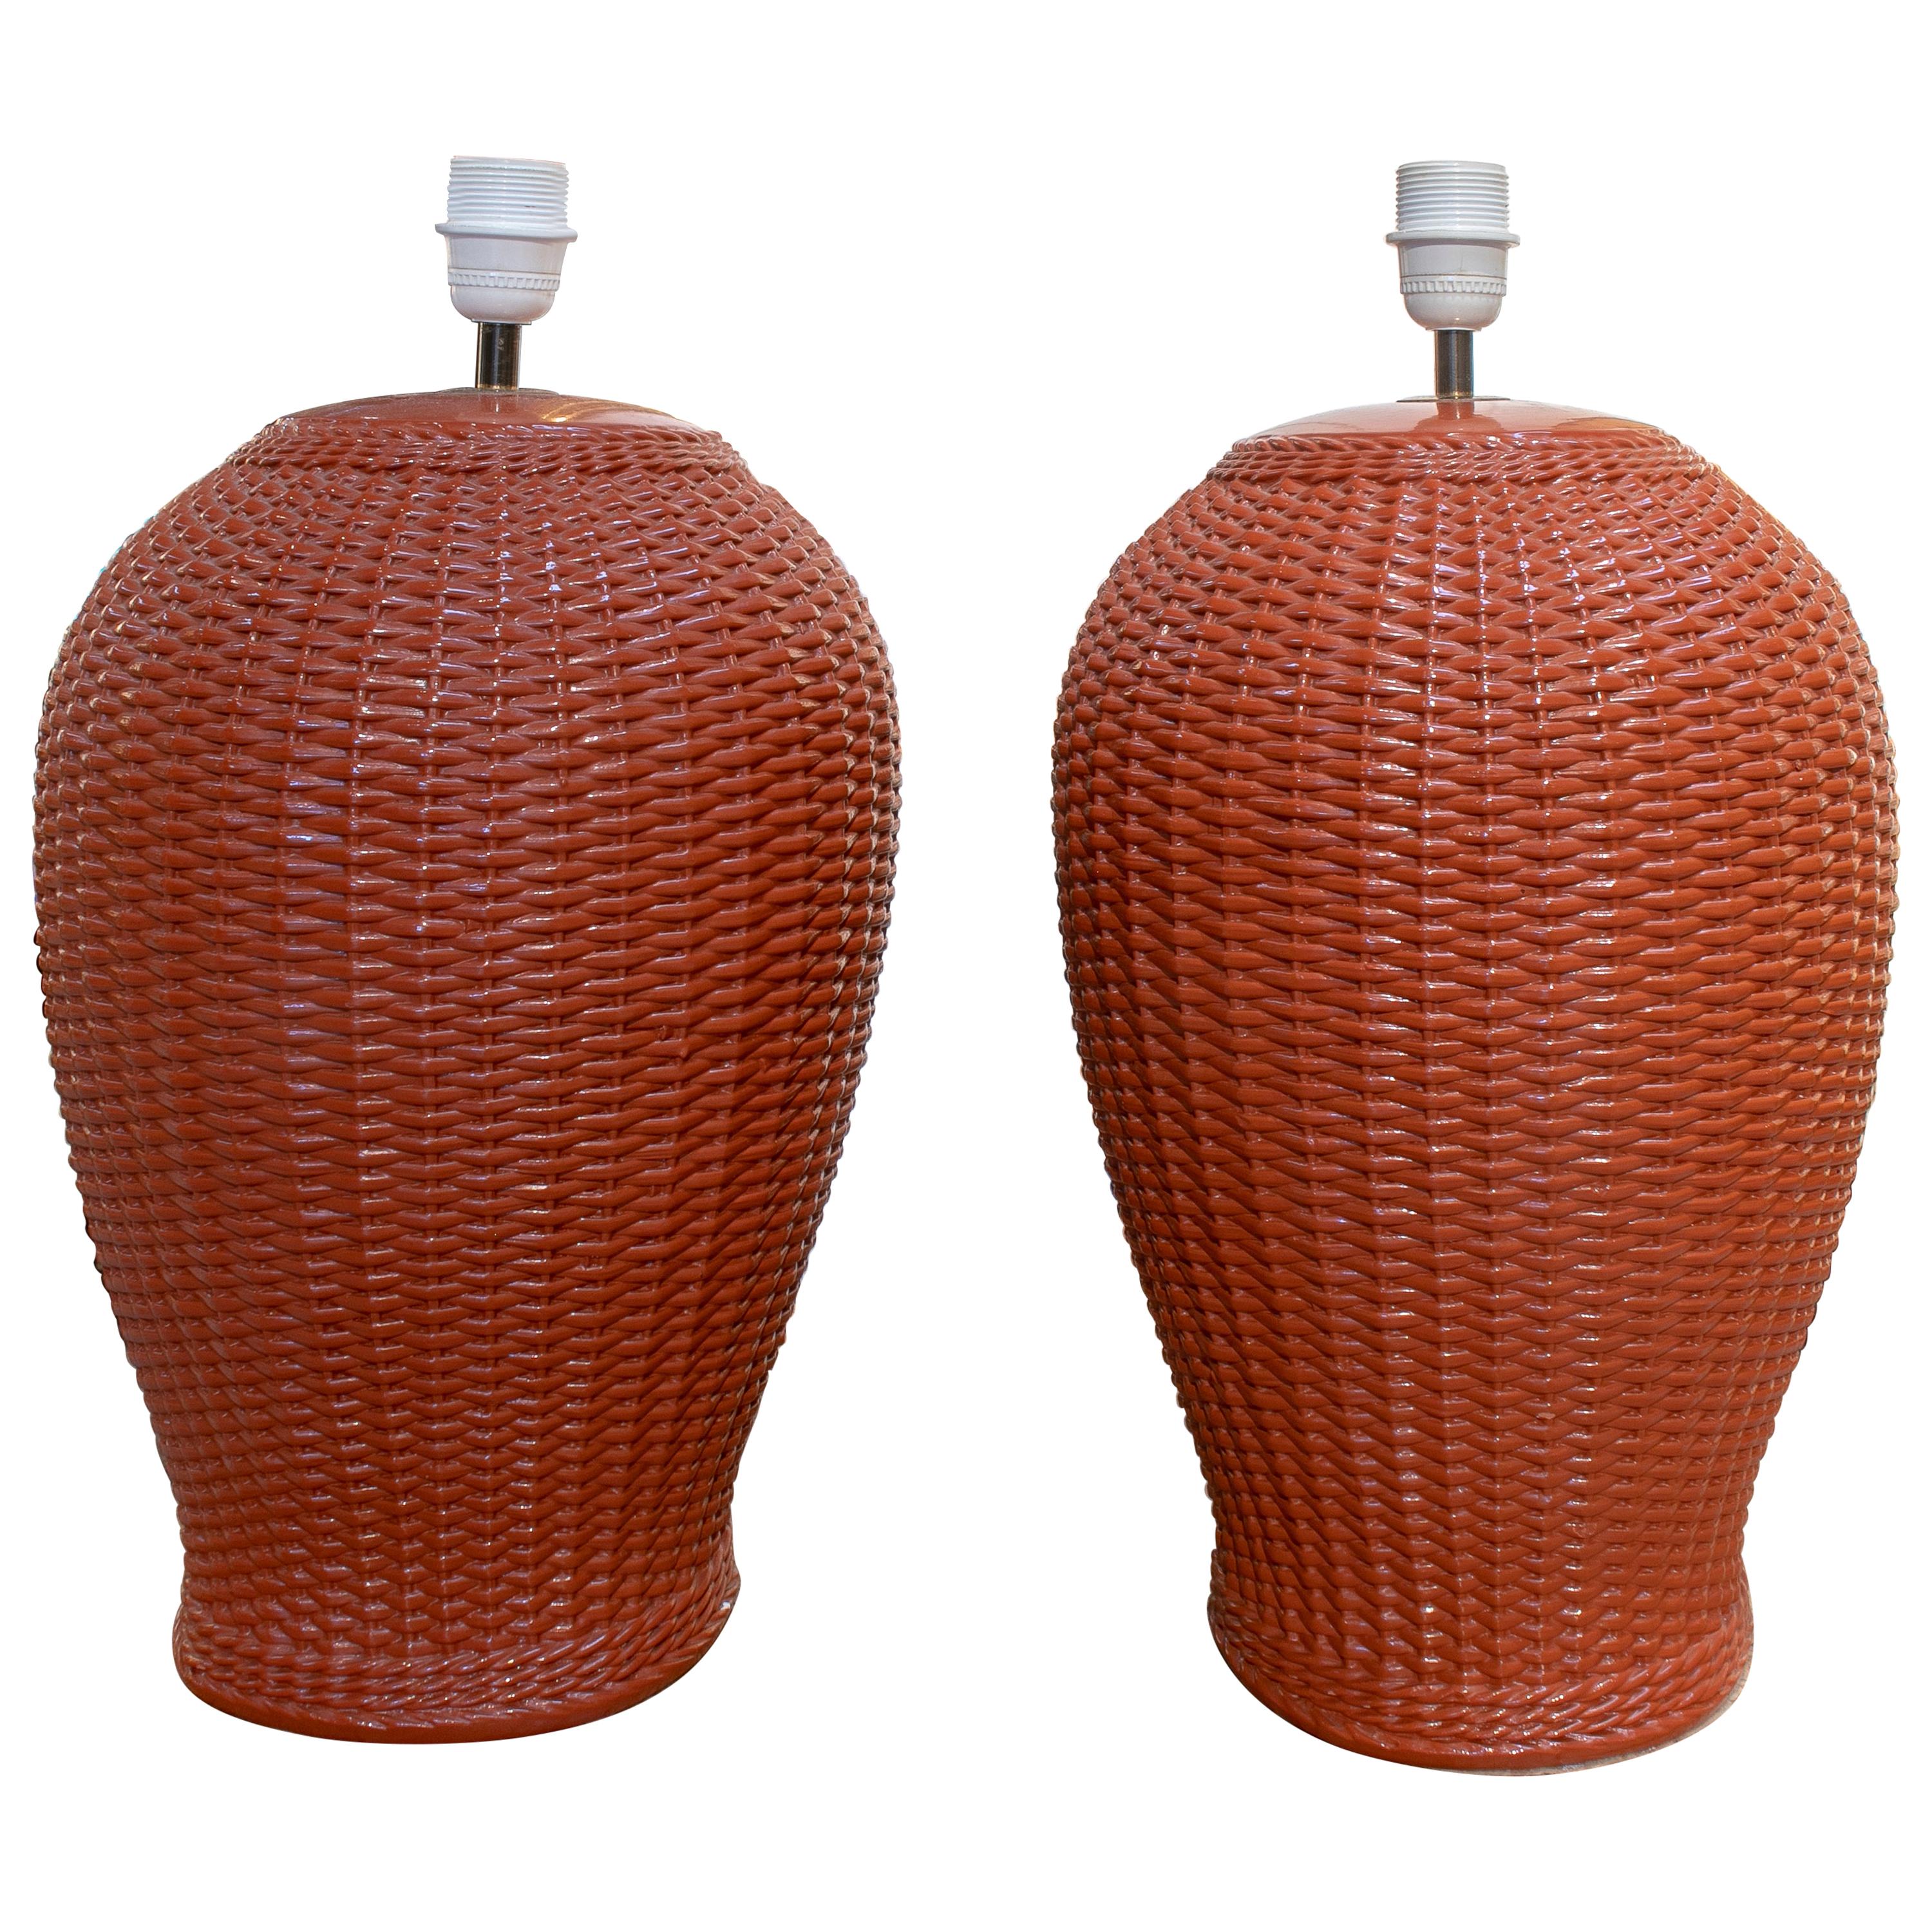 1970s Pair of Spanish Red Ceramic Table Lamps Imitating Hand Woven Wicker